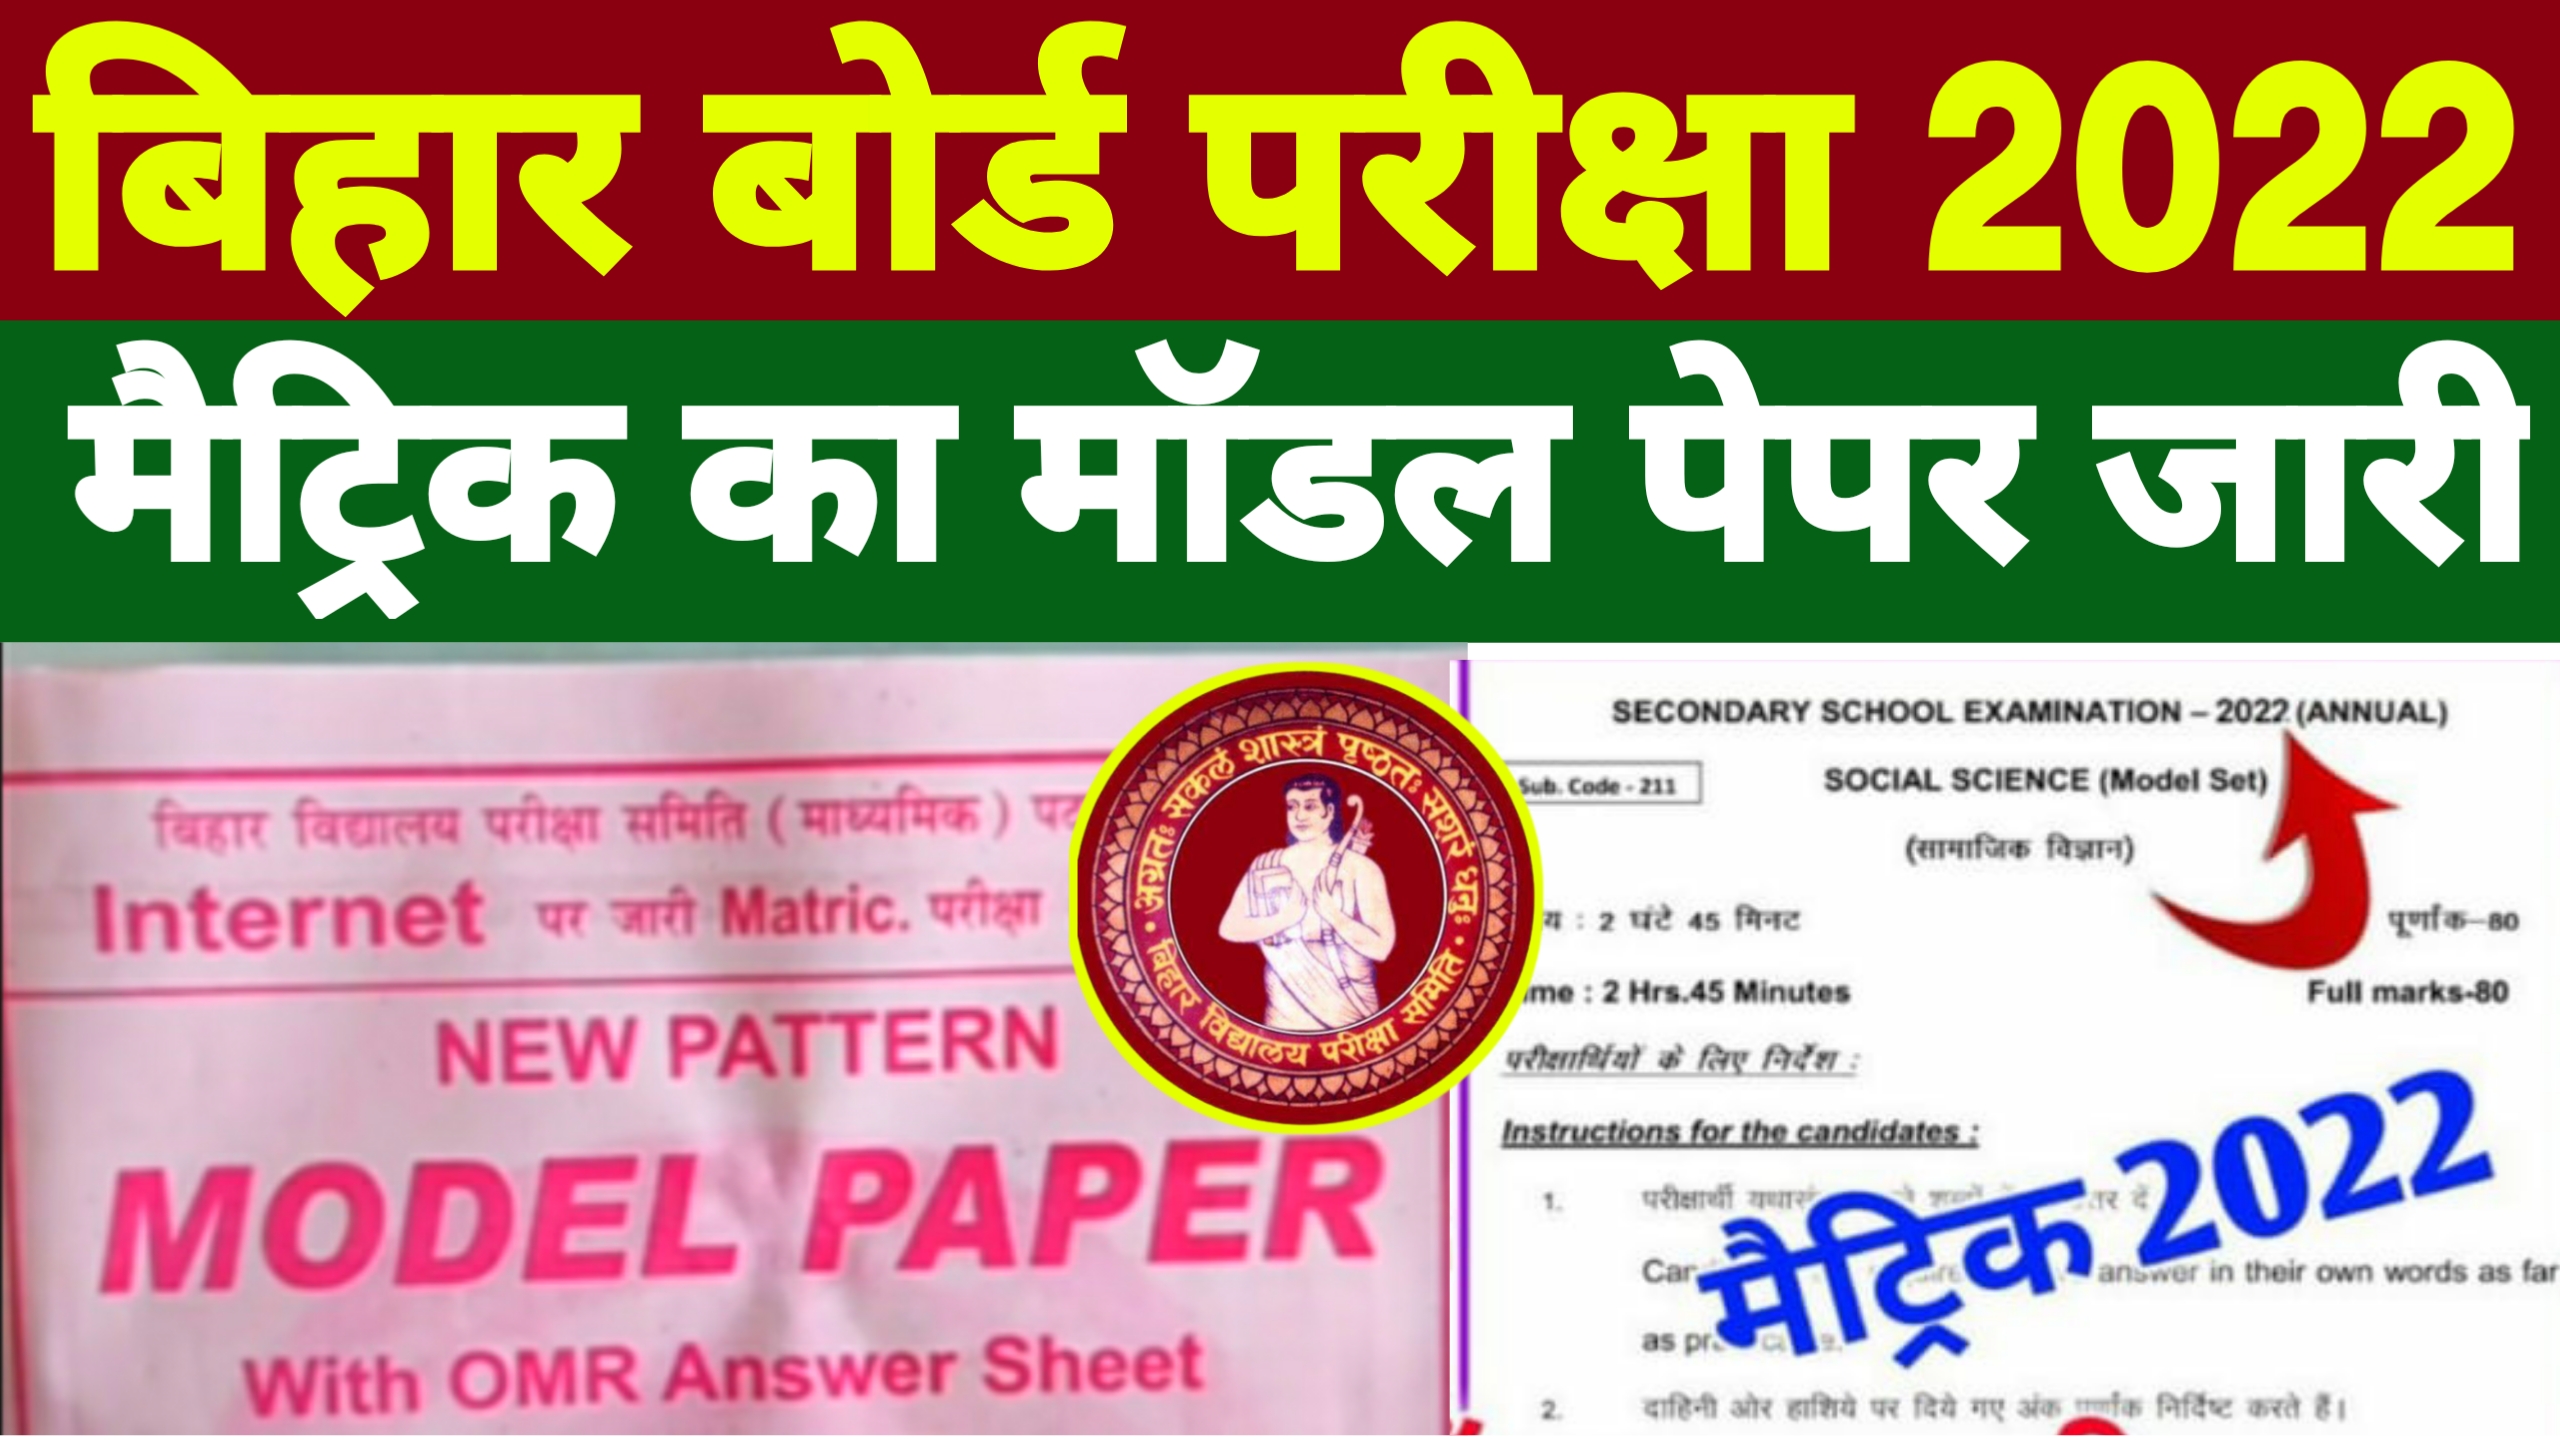 Bihar Board 10th Model Paper 2022 Pdf Download | Bseb Matric Model Paper 2022 All Subject Pdf Out